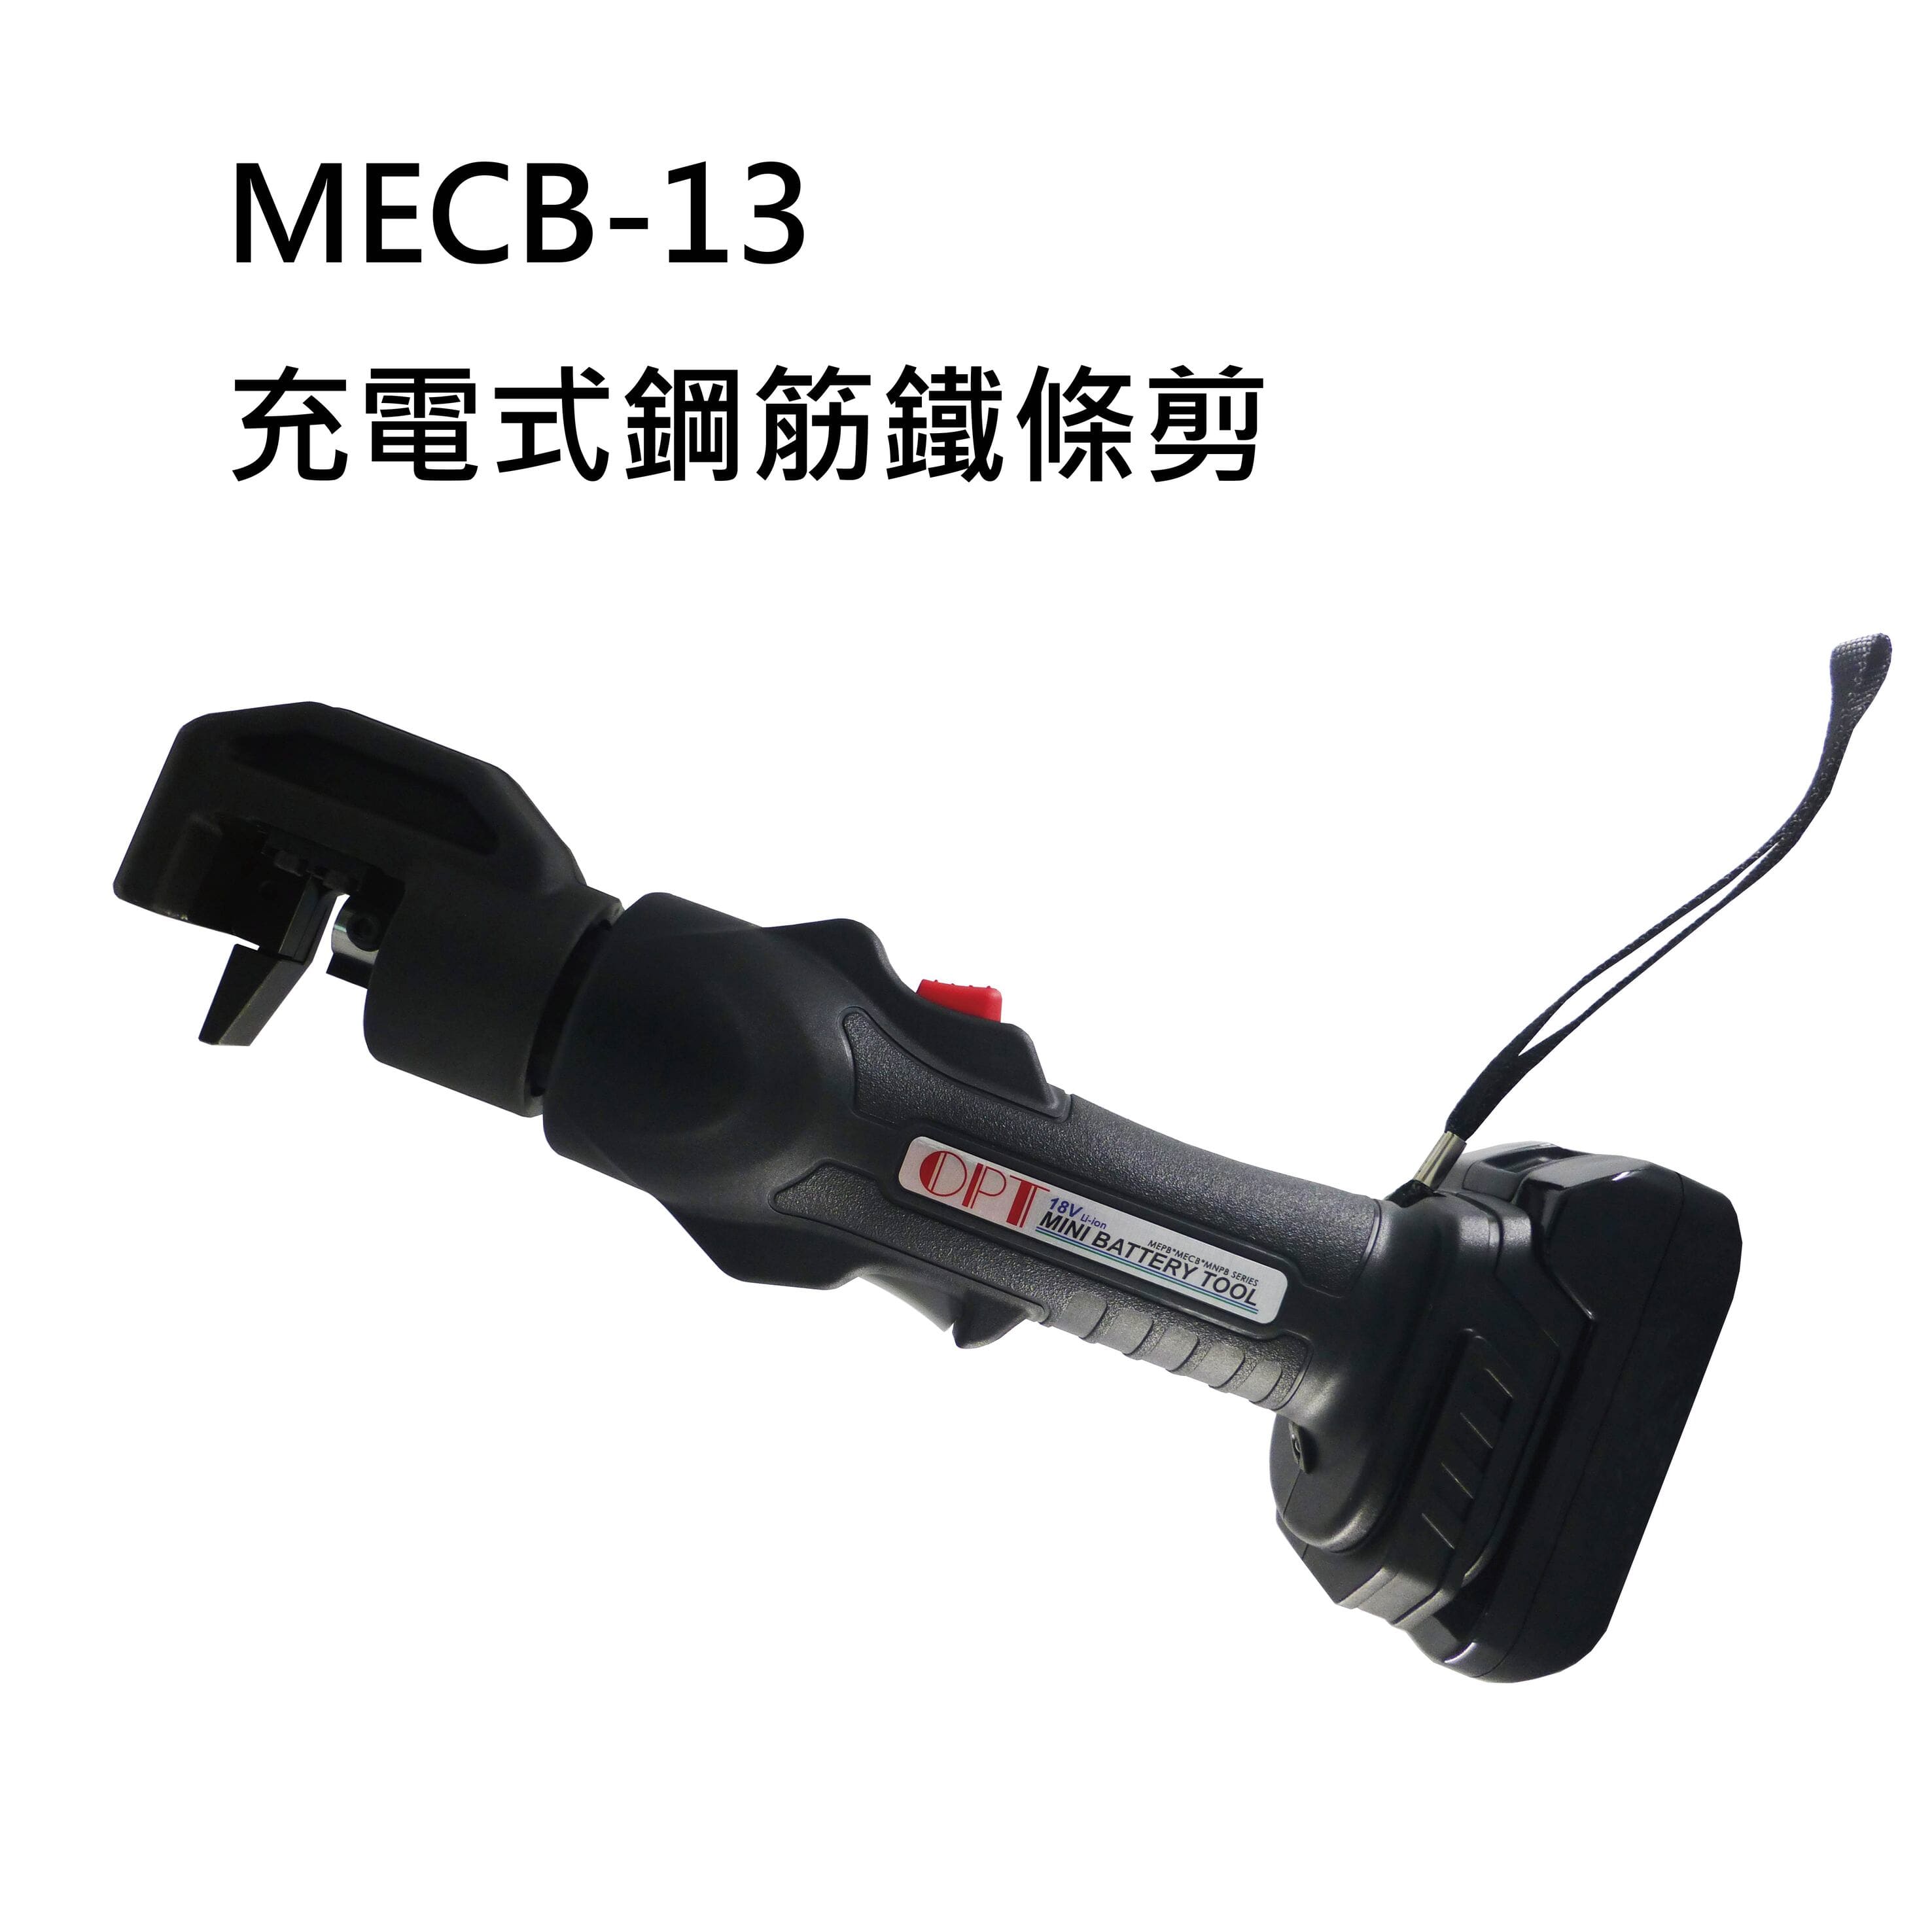 MECB-13 CORDLESS HYDRAULIC CABLE CUTTERS-MECB-13